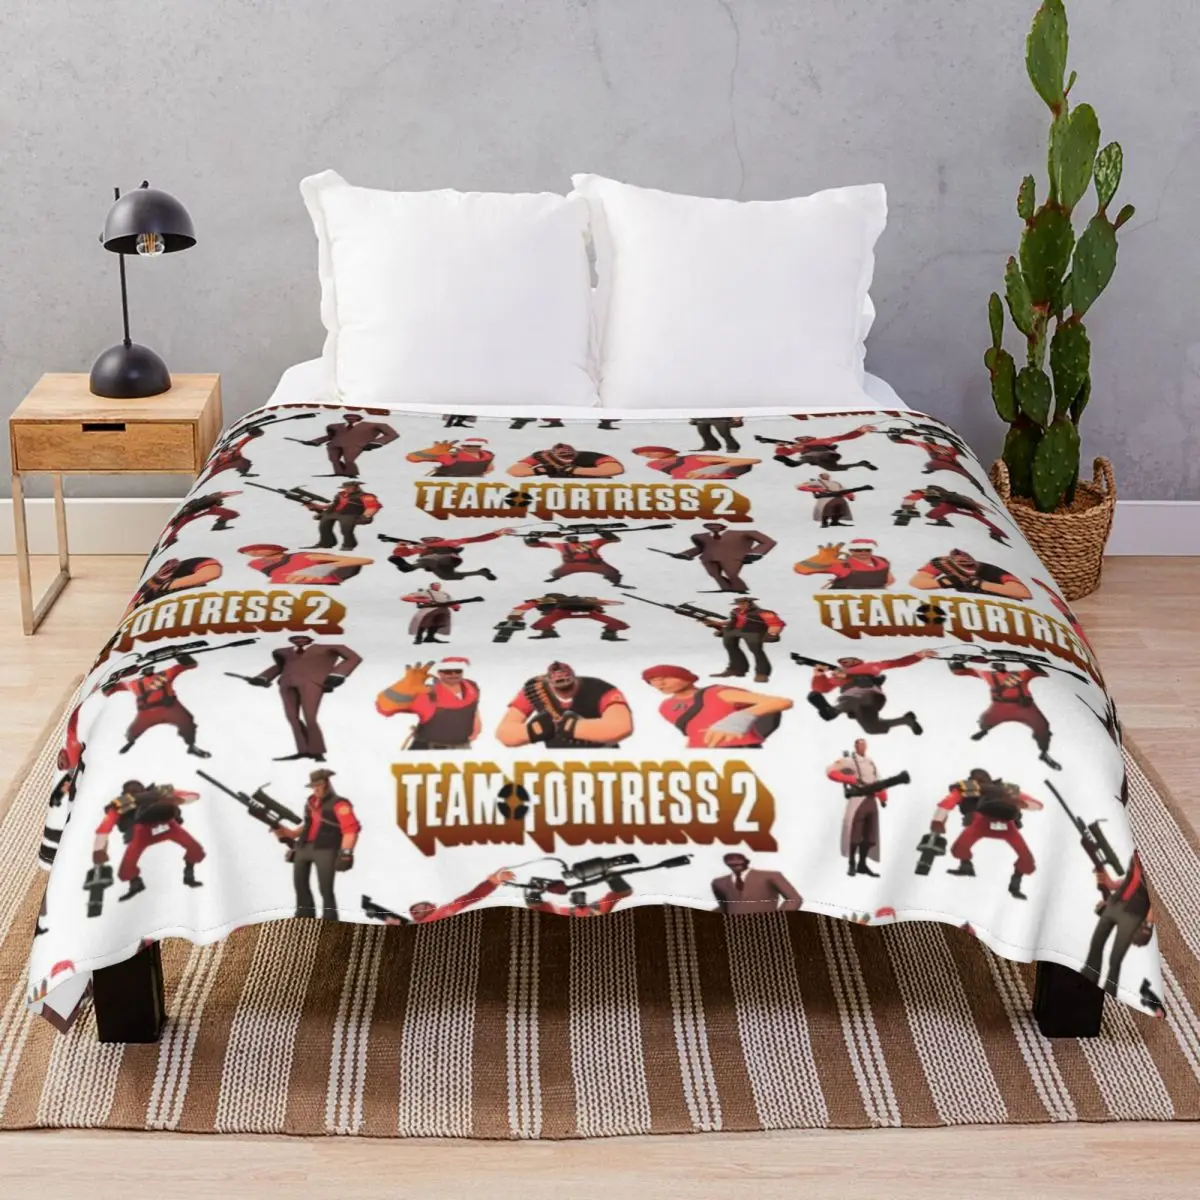 Team Fortress 2 Blankets Flannel Plush Decoration Fluffy Unisex Throw Blanket for Bed Home Couch Camp Office